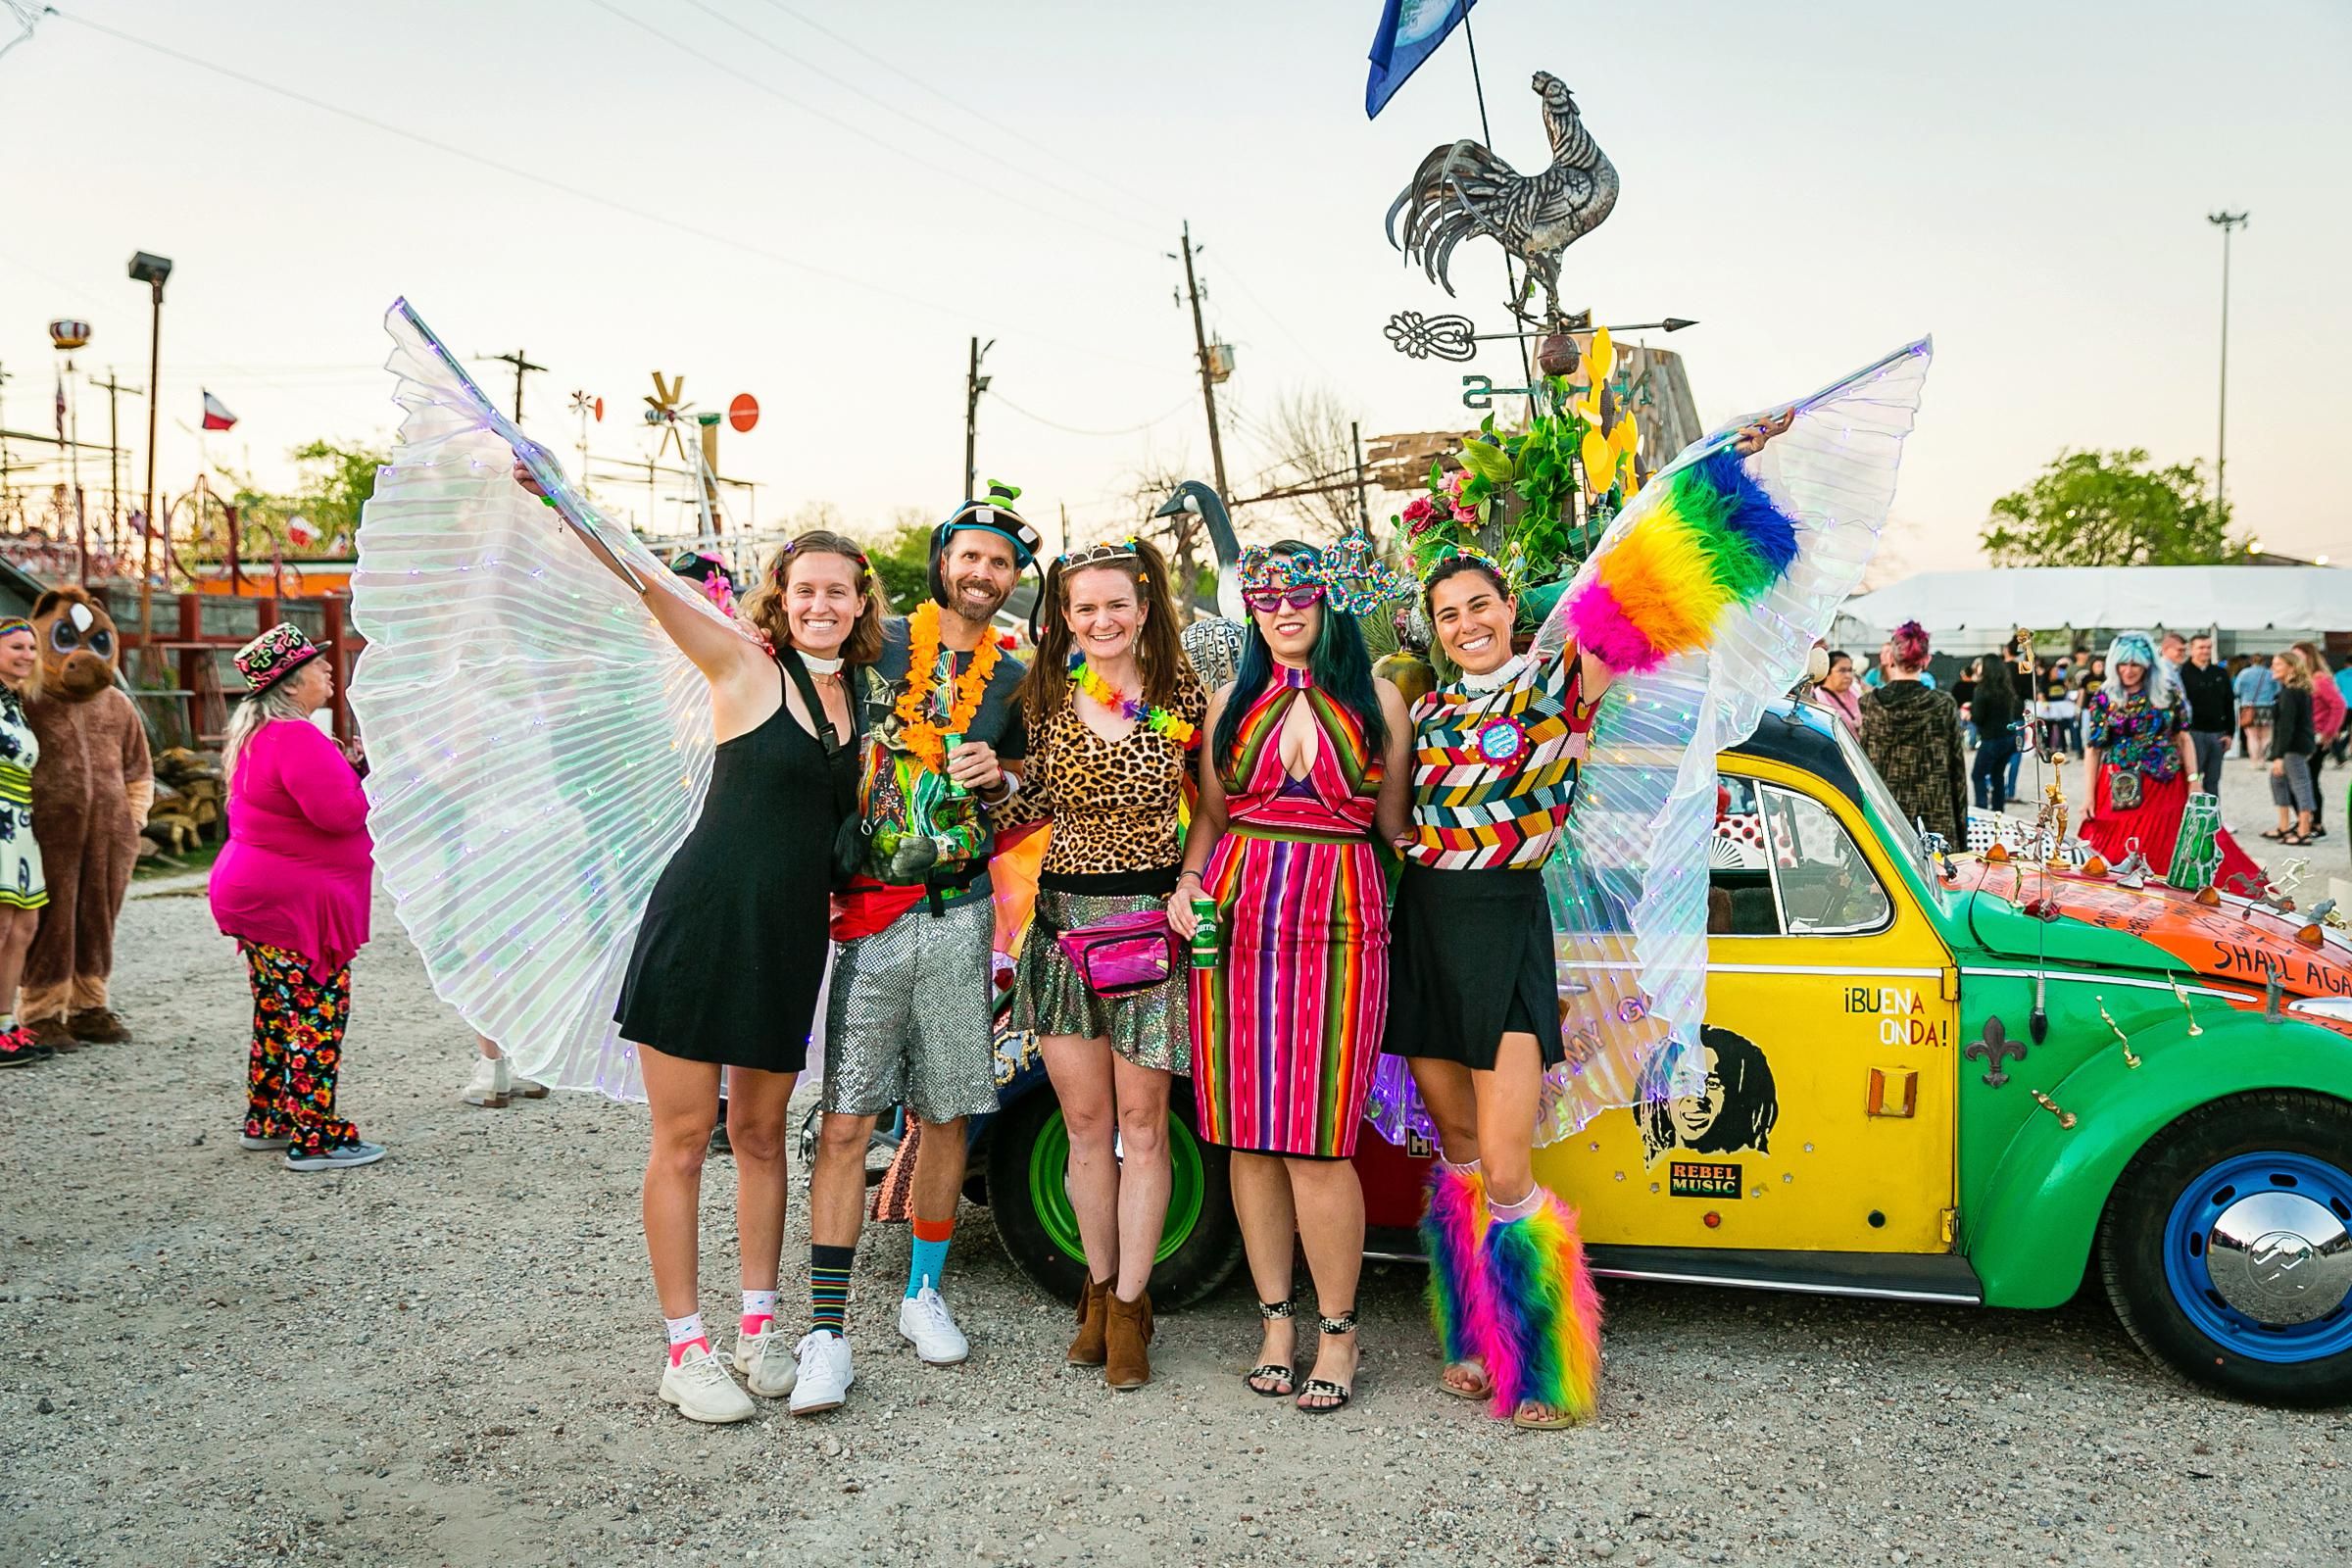 Local schools gearing up for annual Art Car Parade